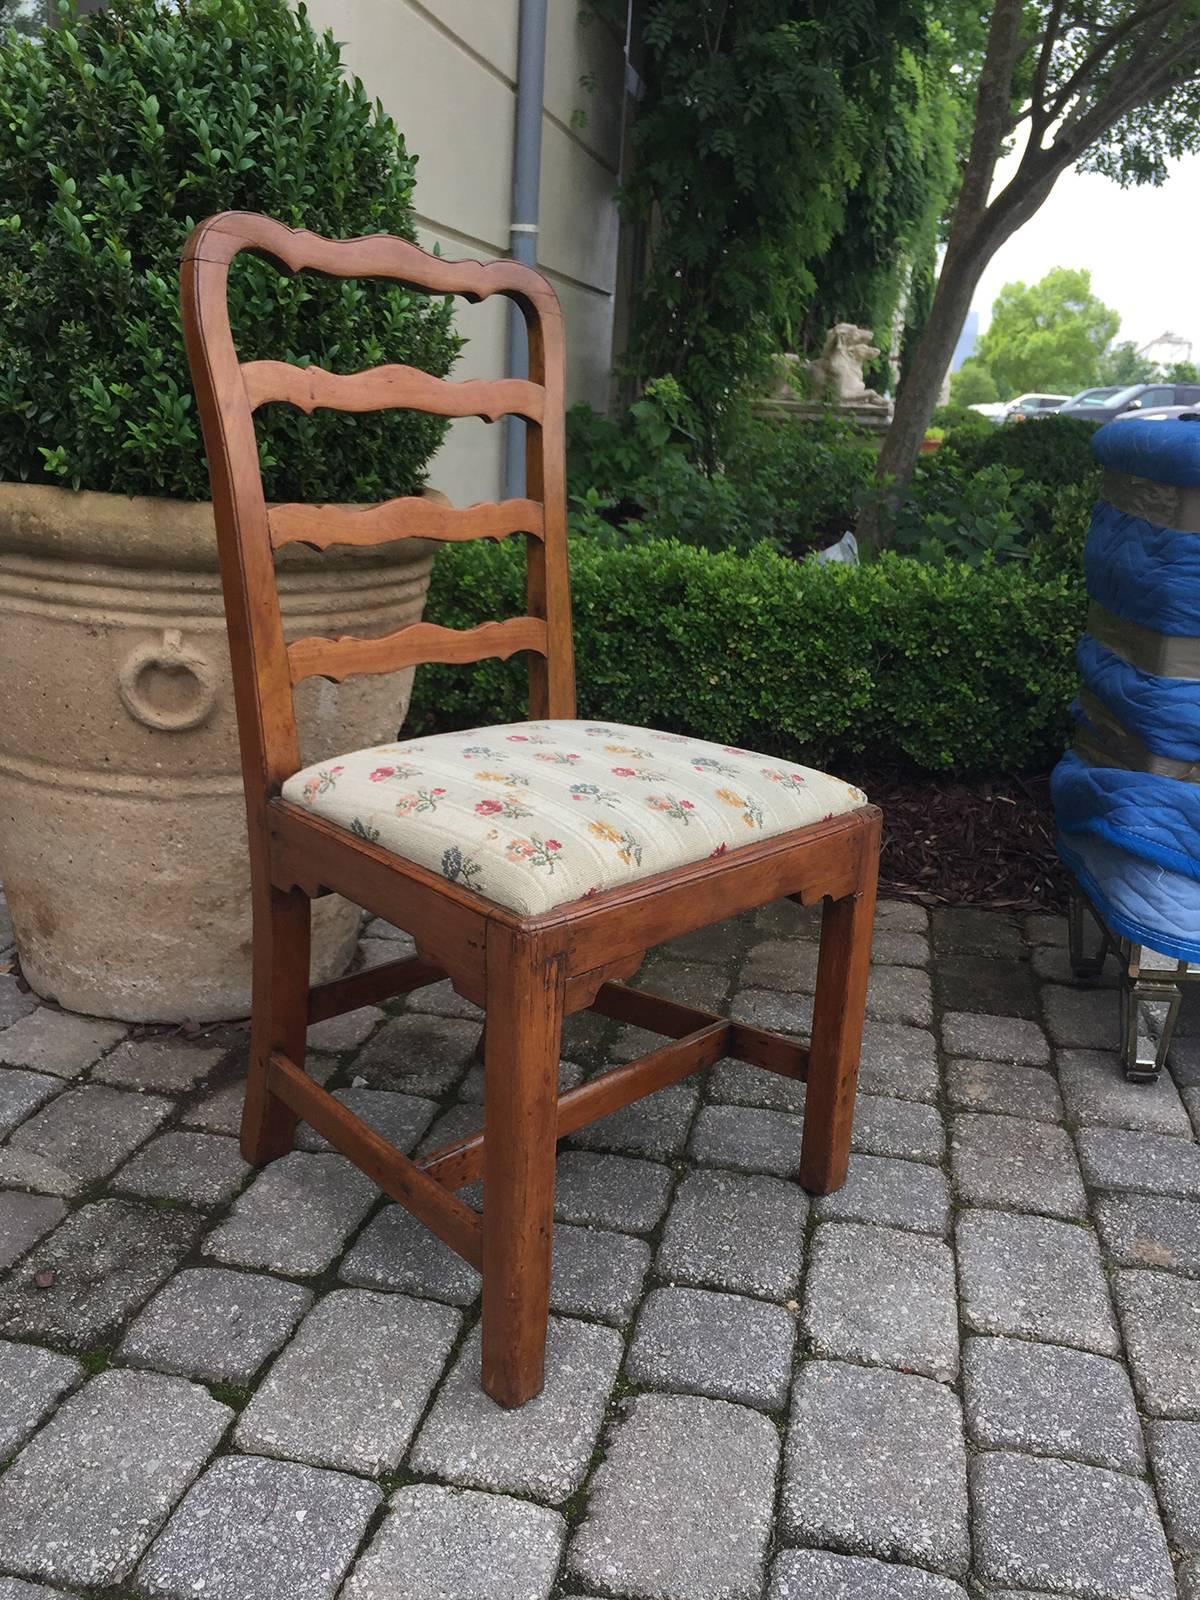 Set of six 18th-19th century English George III ladder back side chairs, mahogany frames with rounded ribbon slat back, needlepoint seats, Mortise & Tenon construction.